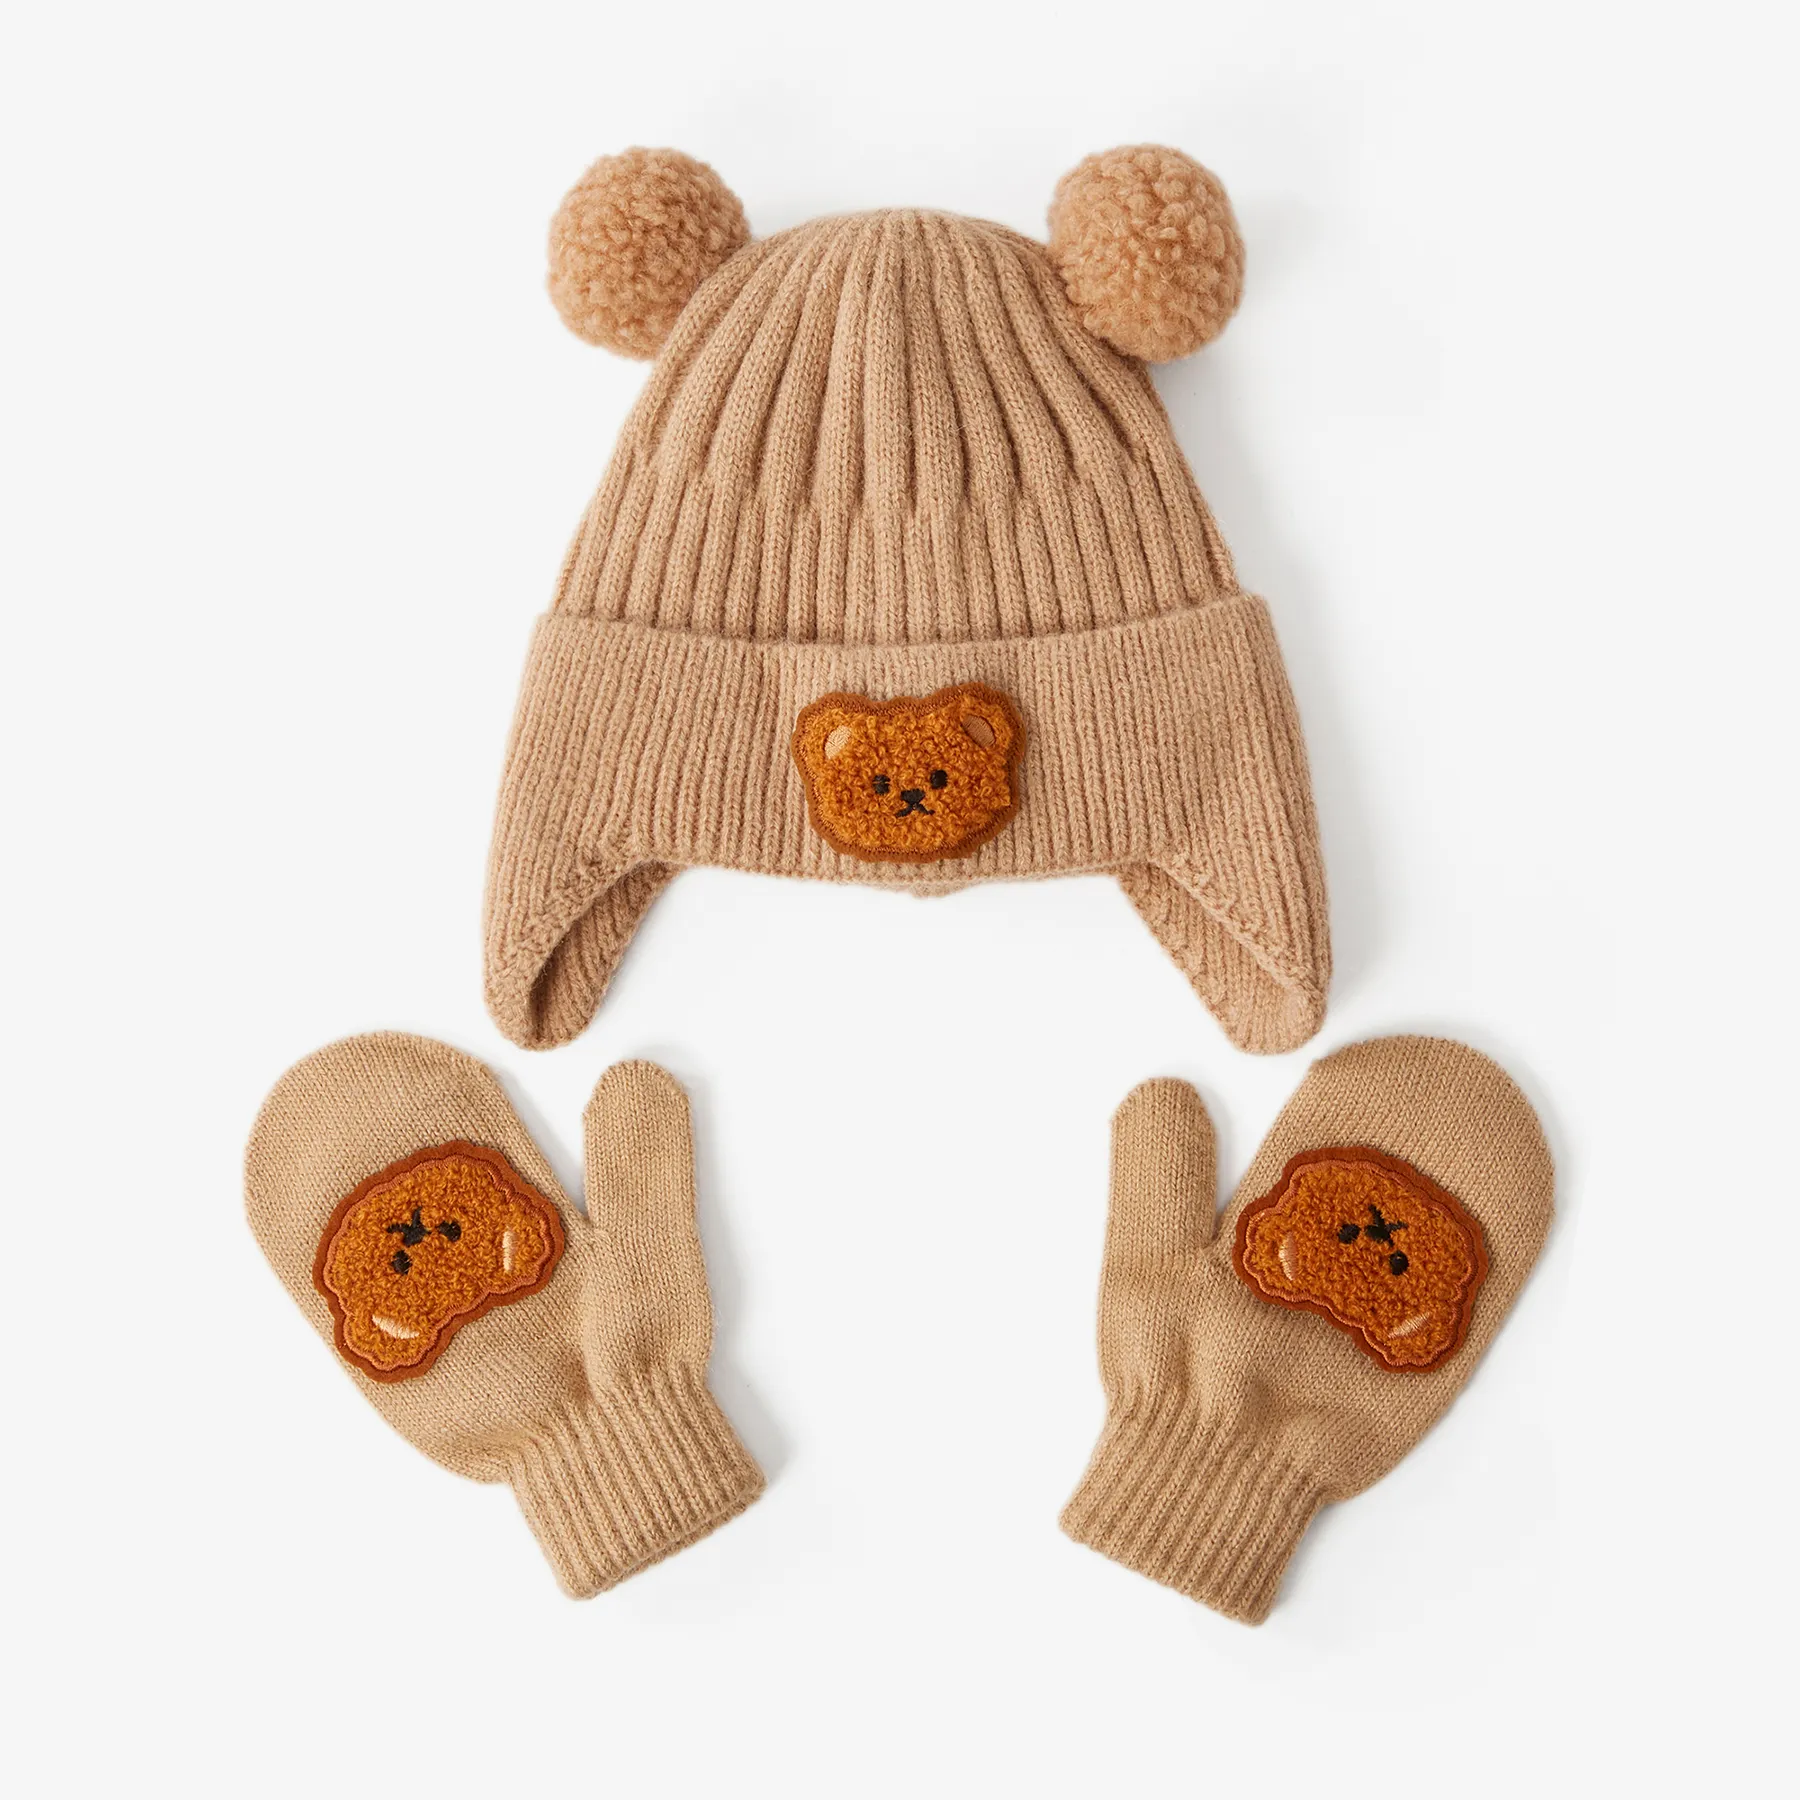 A must-have warm set of woolen ear hats and gloves for Baby/toddler in winter